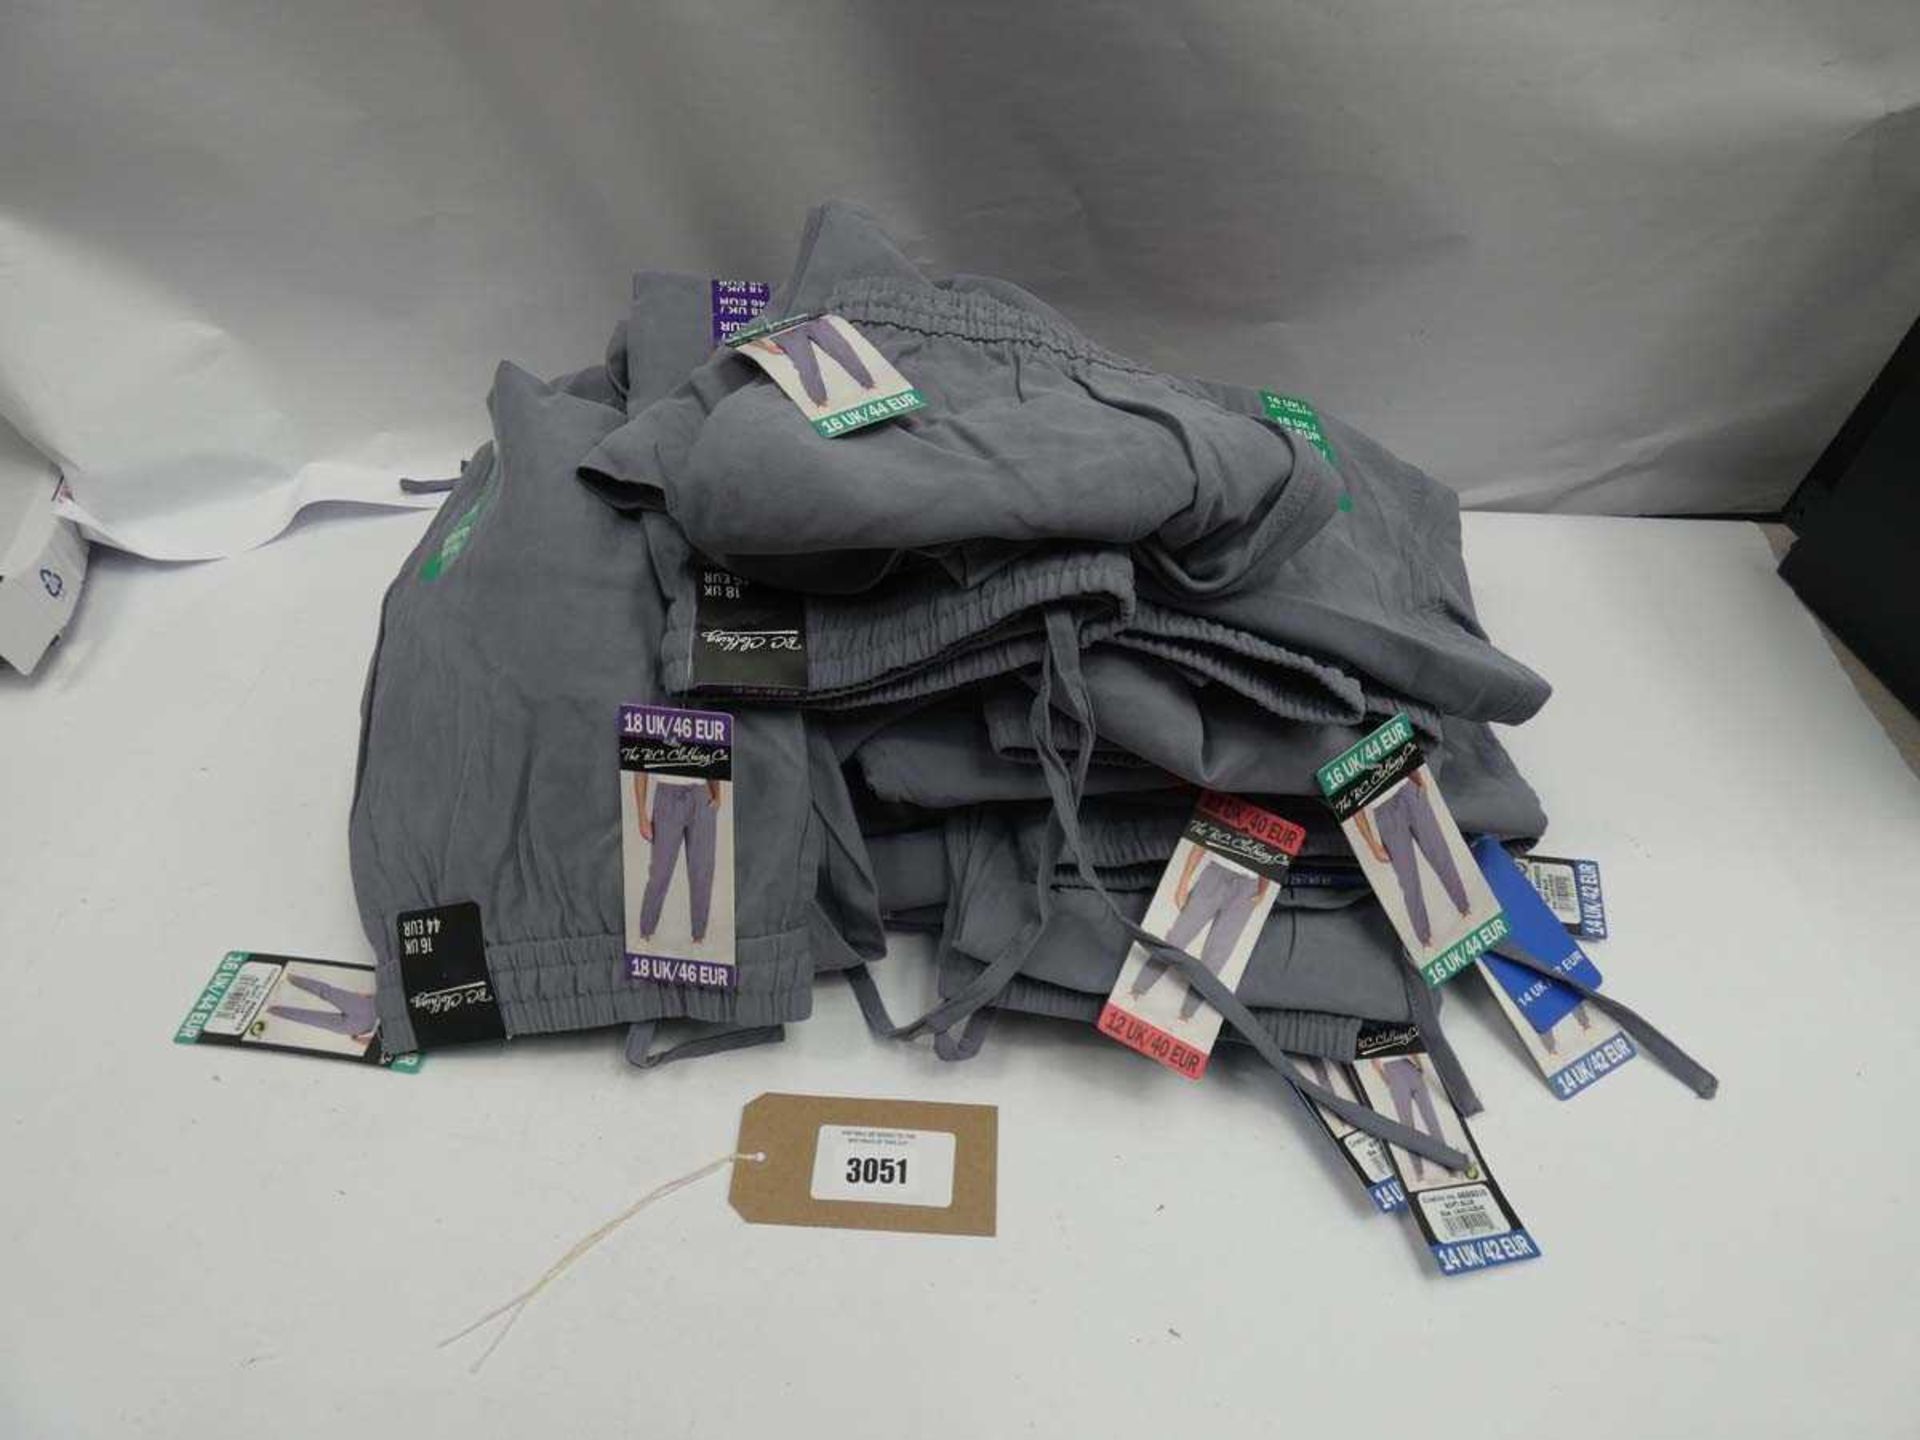 +VAT Bag containing 20 The B.C Clothing Company trousers